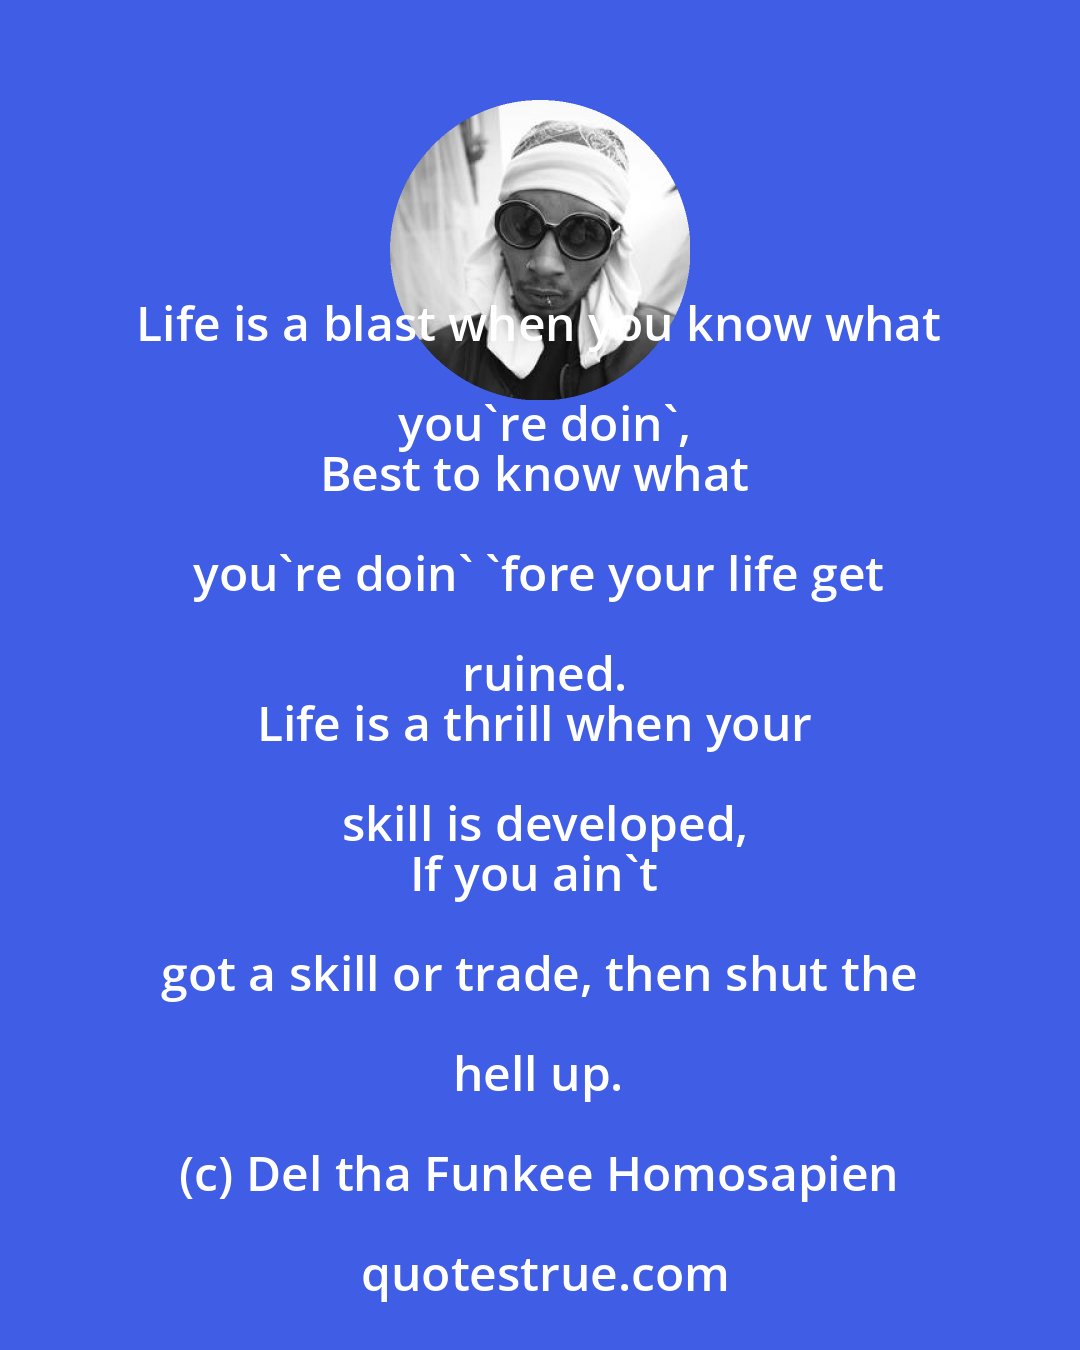 Del tha Funkee Homosapien: Life is a blast when you know what you're doin',
Best to know what you're doin' 'fore your life get ruined.
Life is a thrill when your skill is developed,
If you ain't got a skill or trade, then shut the hell up.